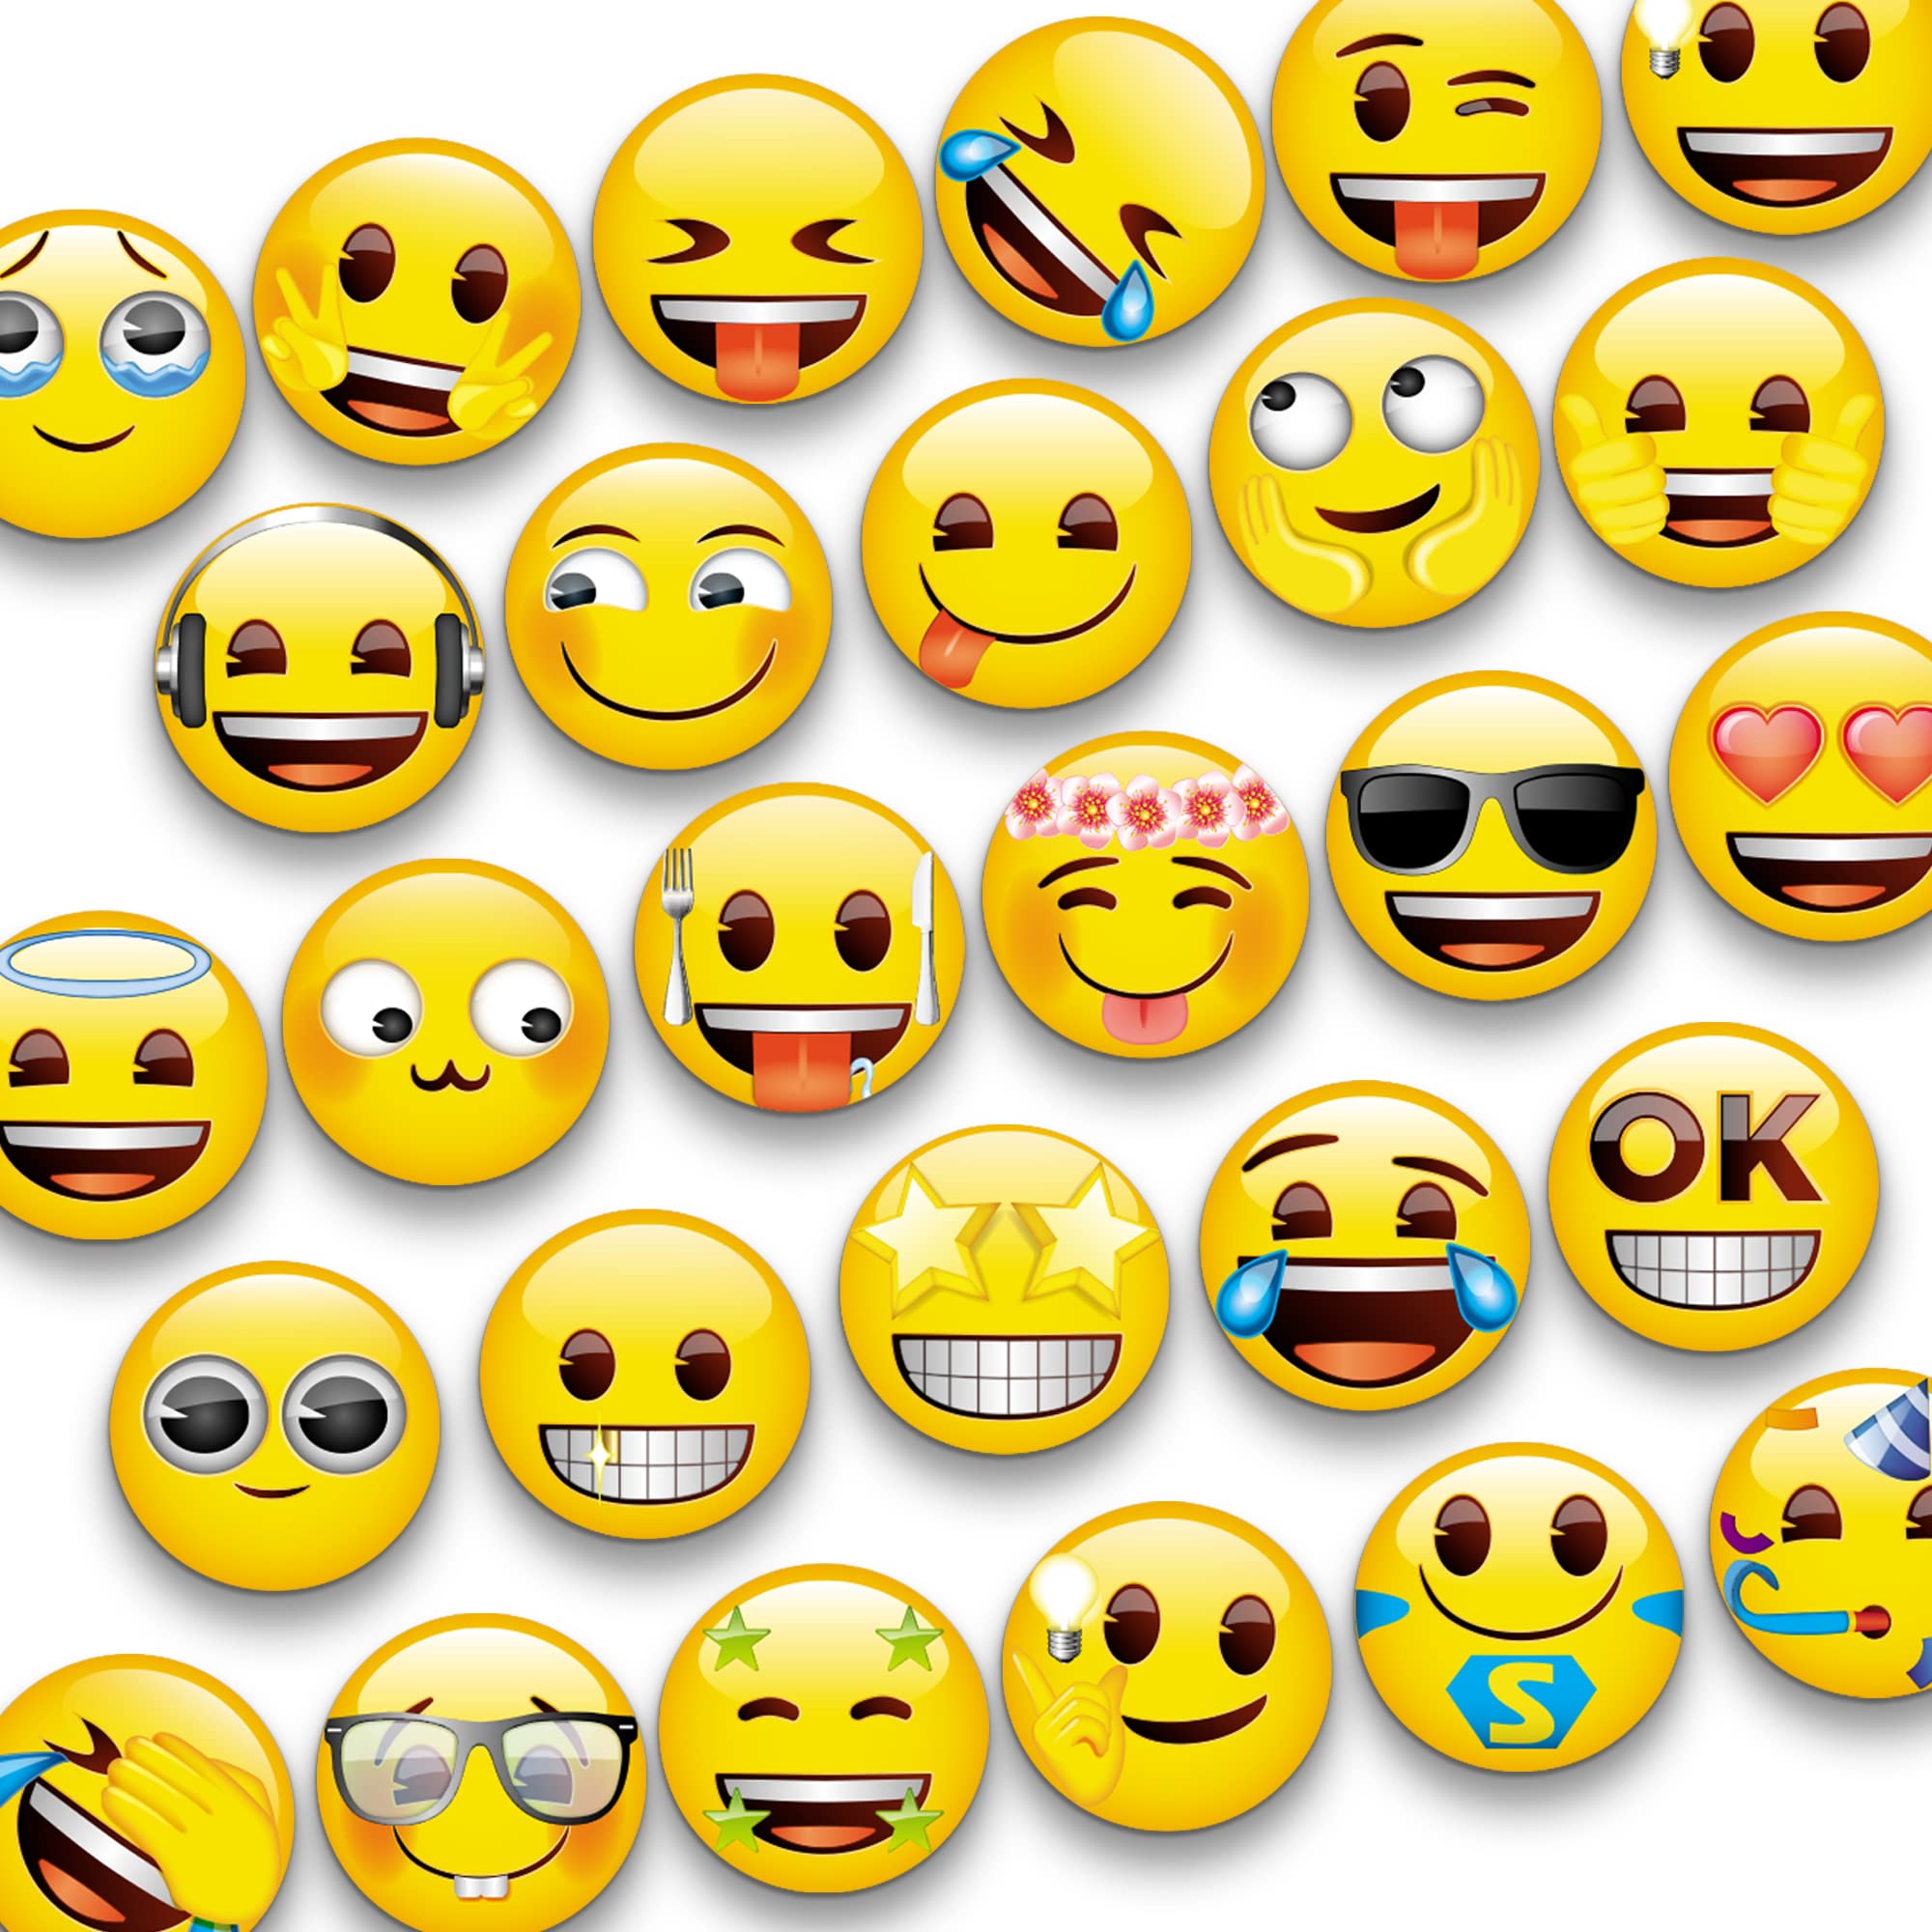 Cheeky emoji or a playful text message bubble.